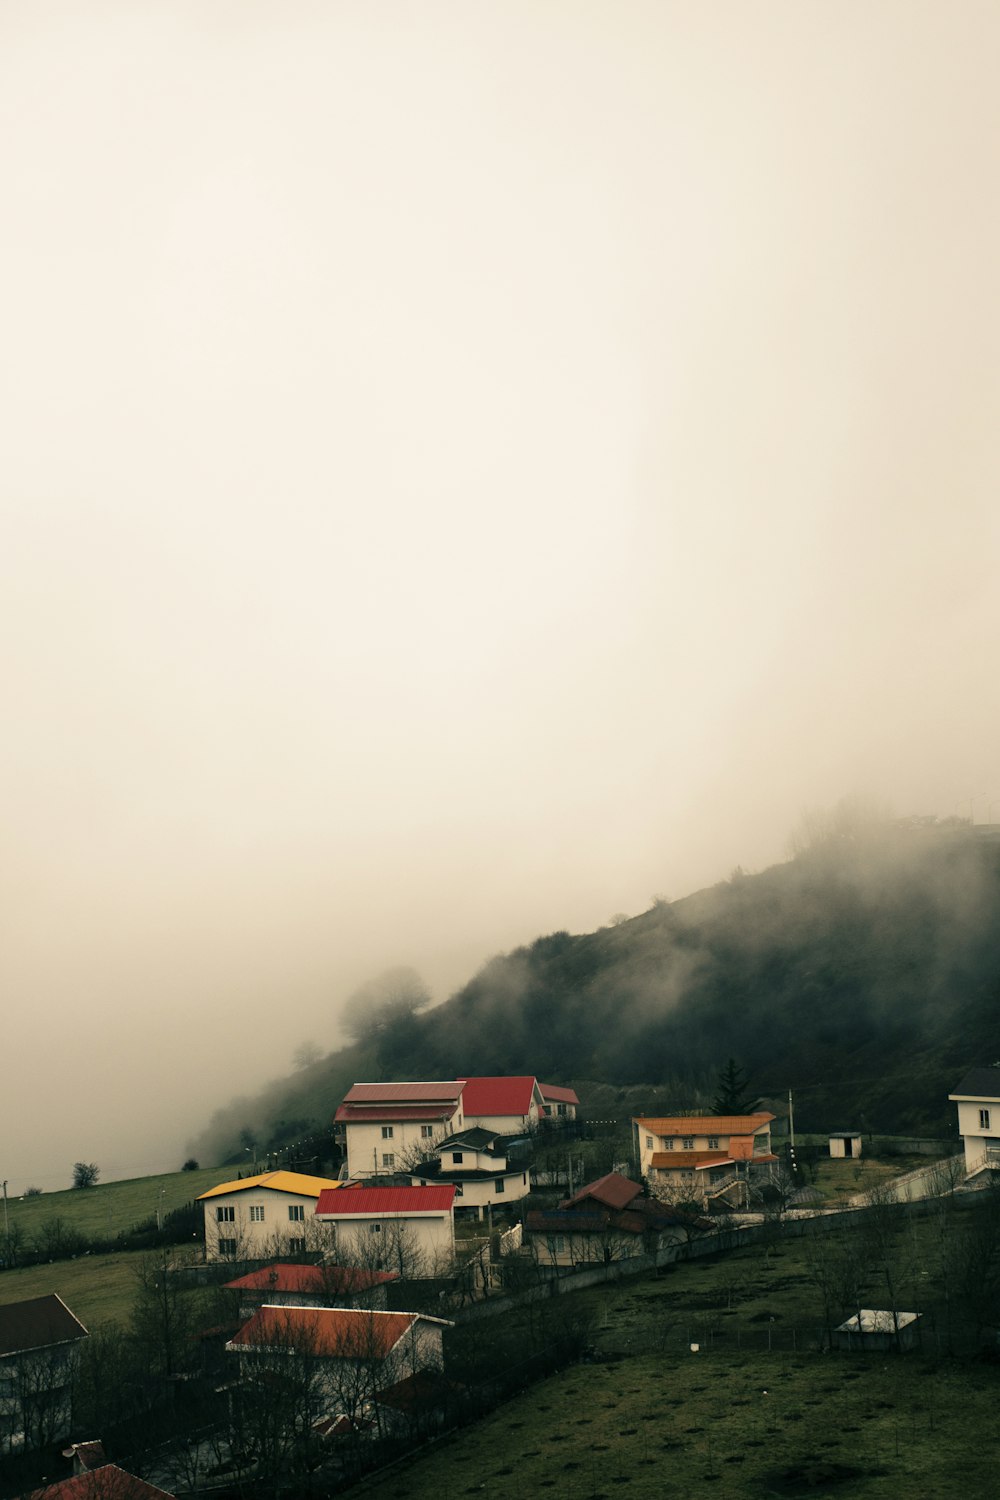 a small village on a hill in the middle of a foggy day